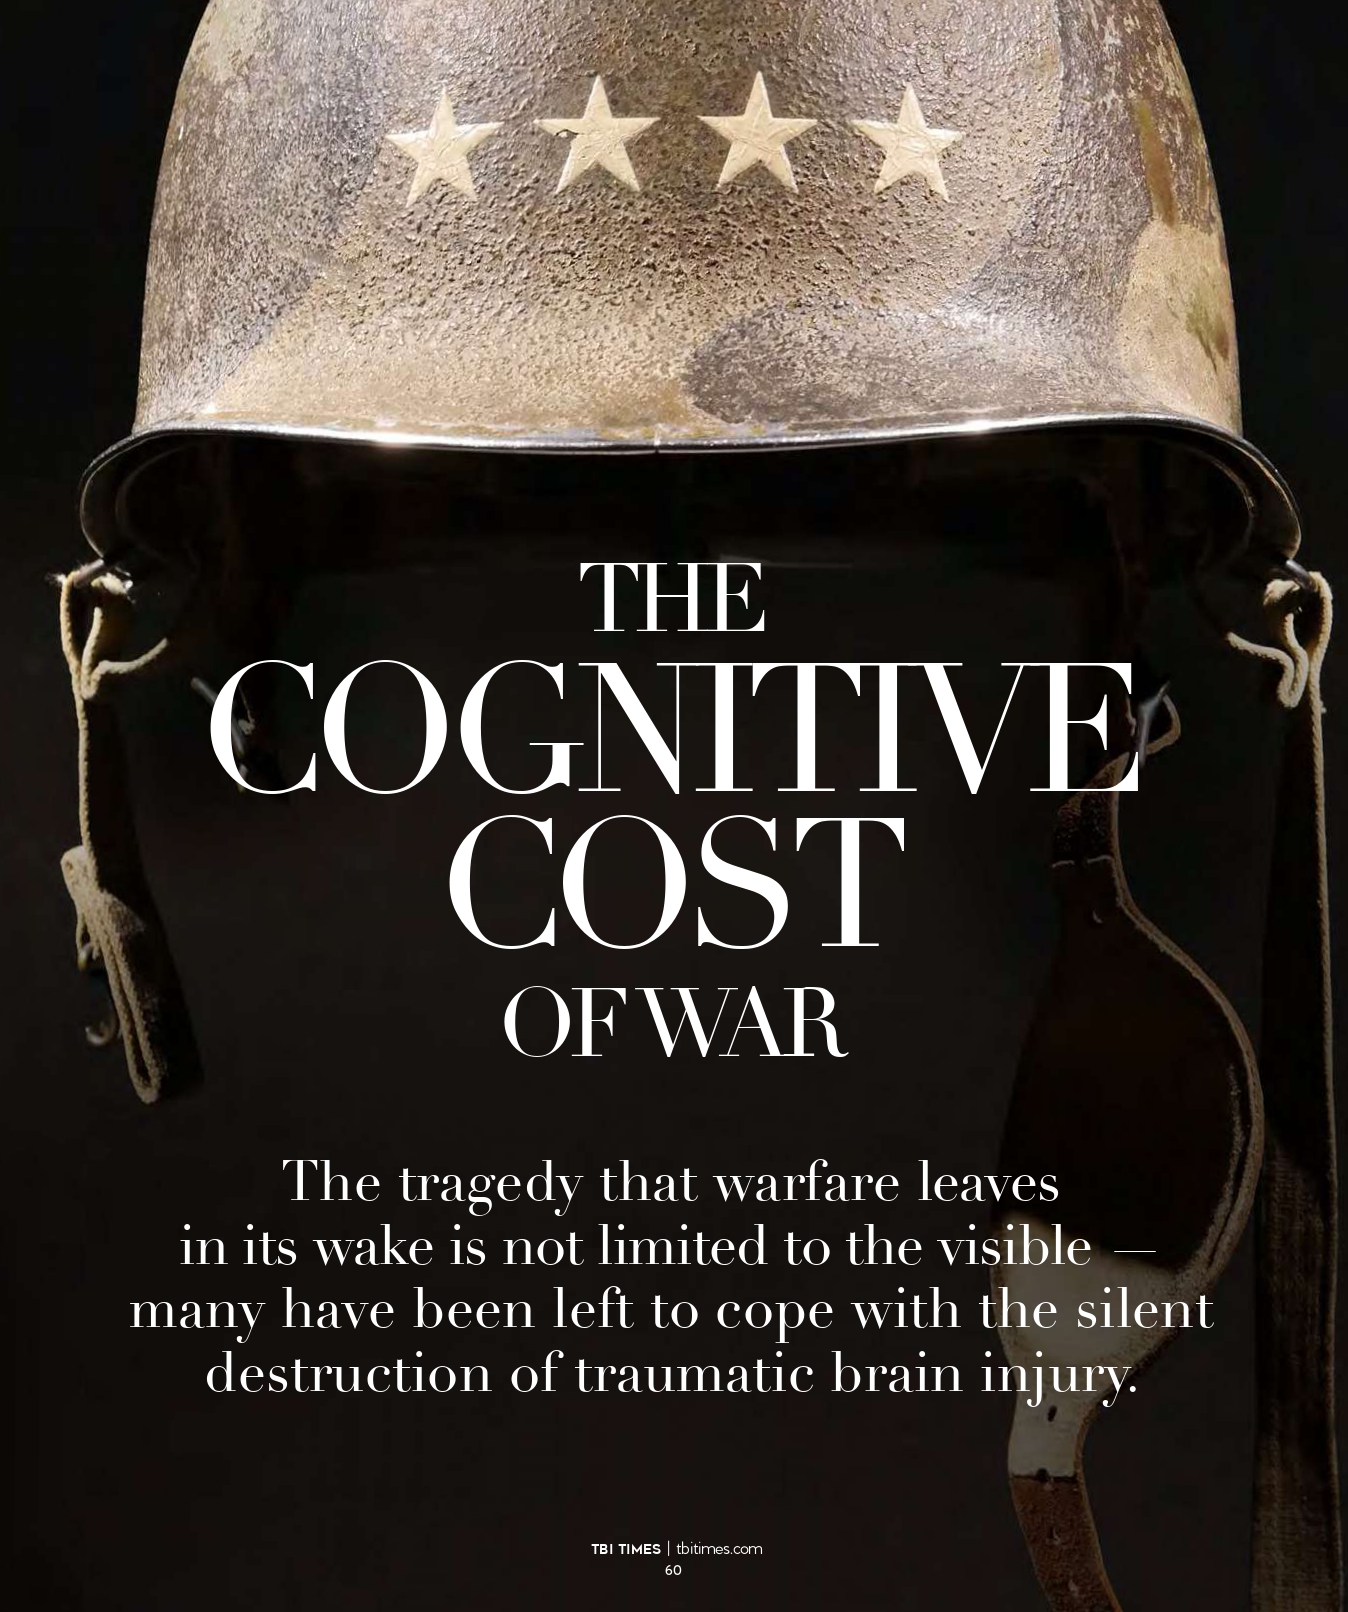 The Cognitive Cost of War